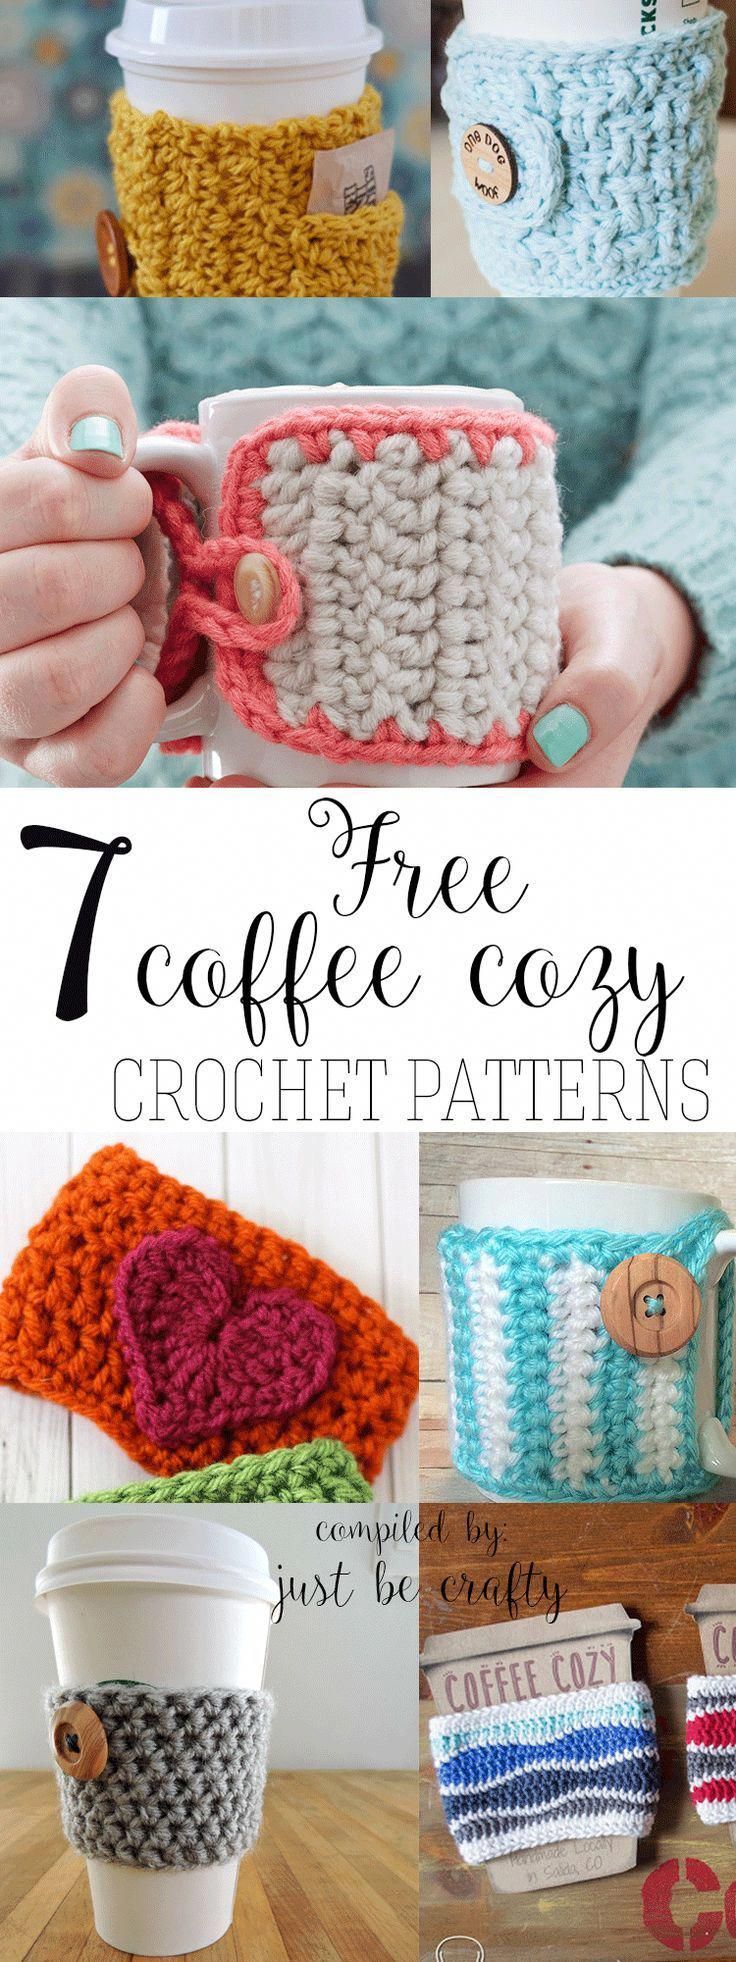 7 Free Crochet Coffee Cozy Patterns You Need to Try! -   12 knitting and crochet Projects coffee cozy ideas